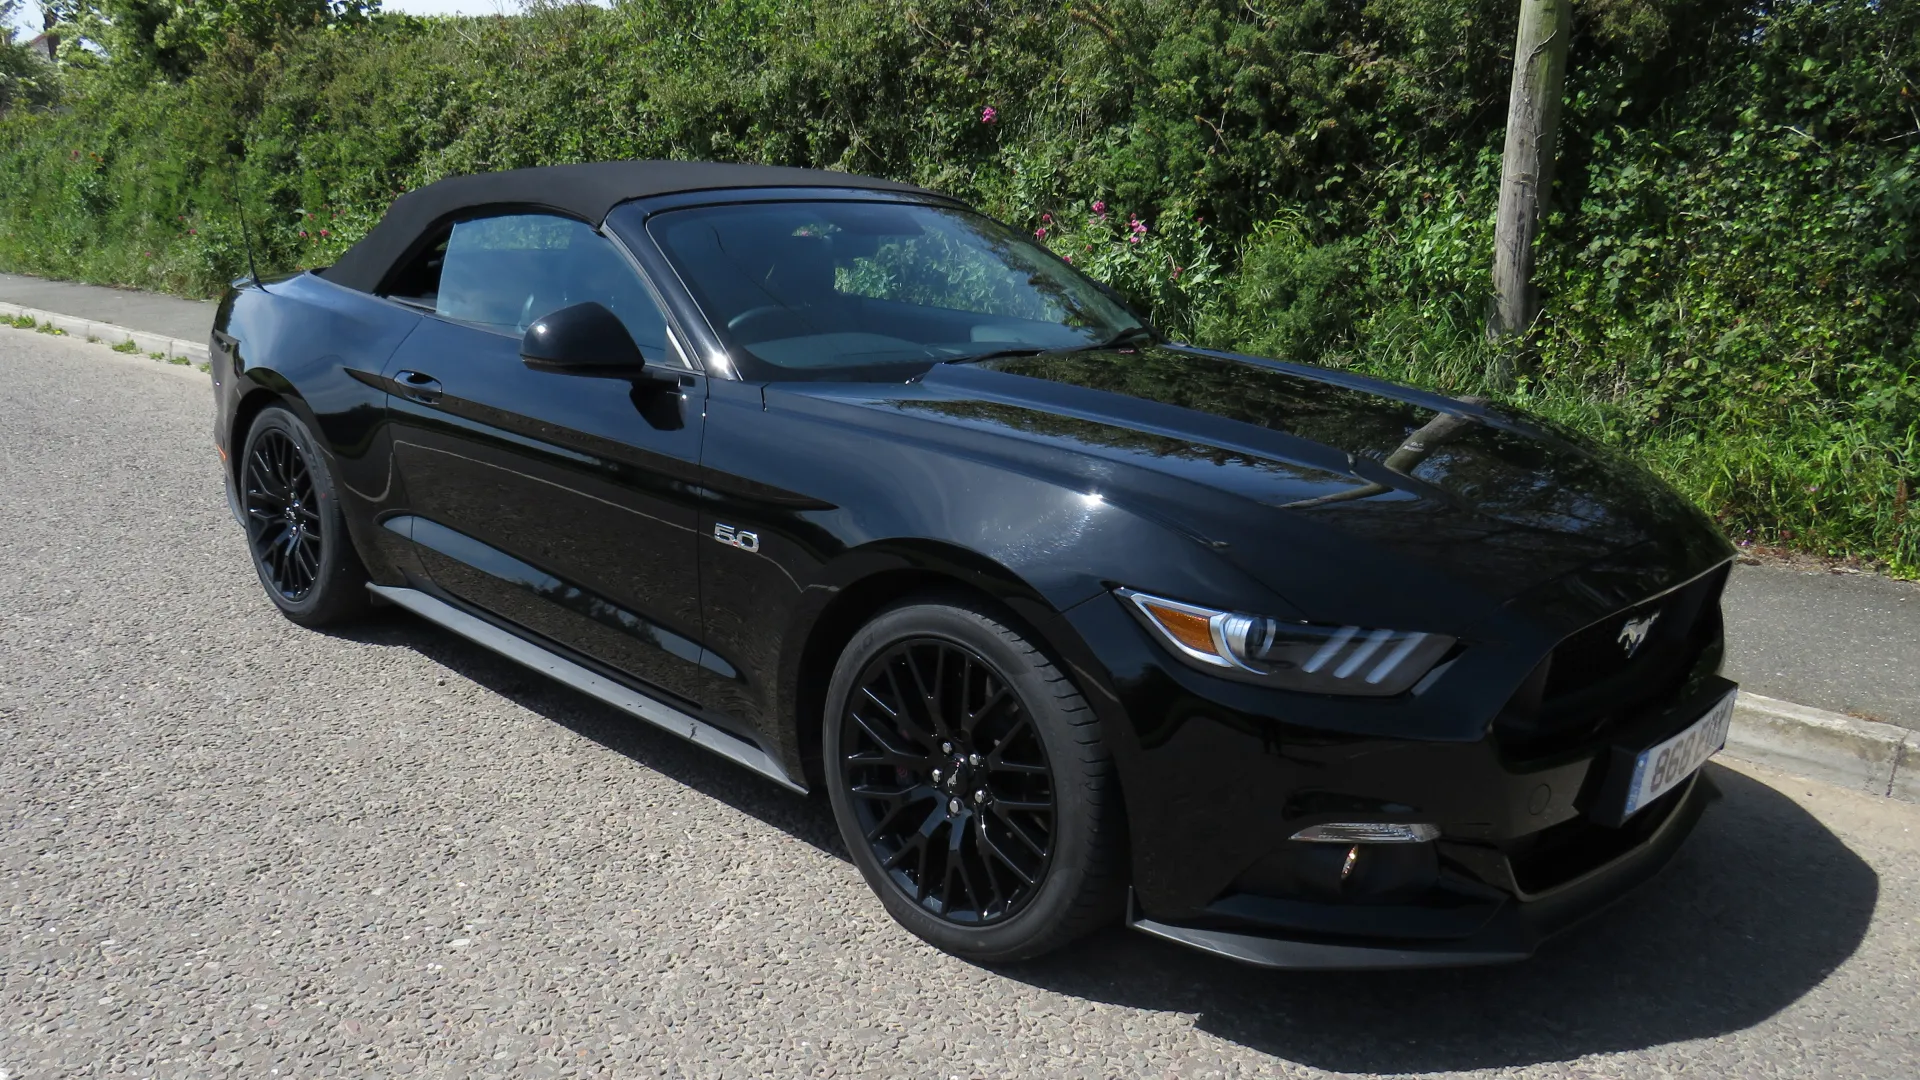 Ford Mustang 5.0L V8 GT Convertible